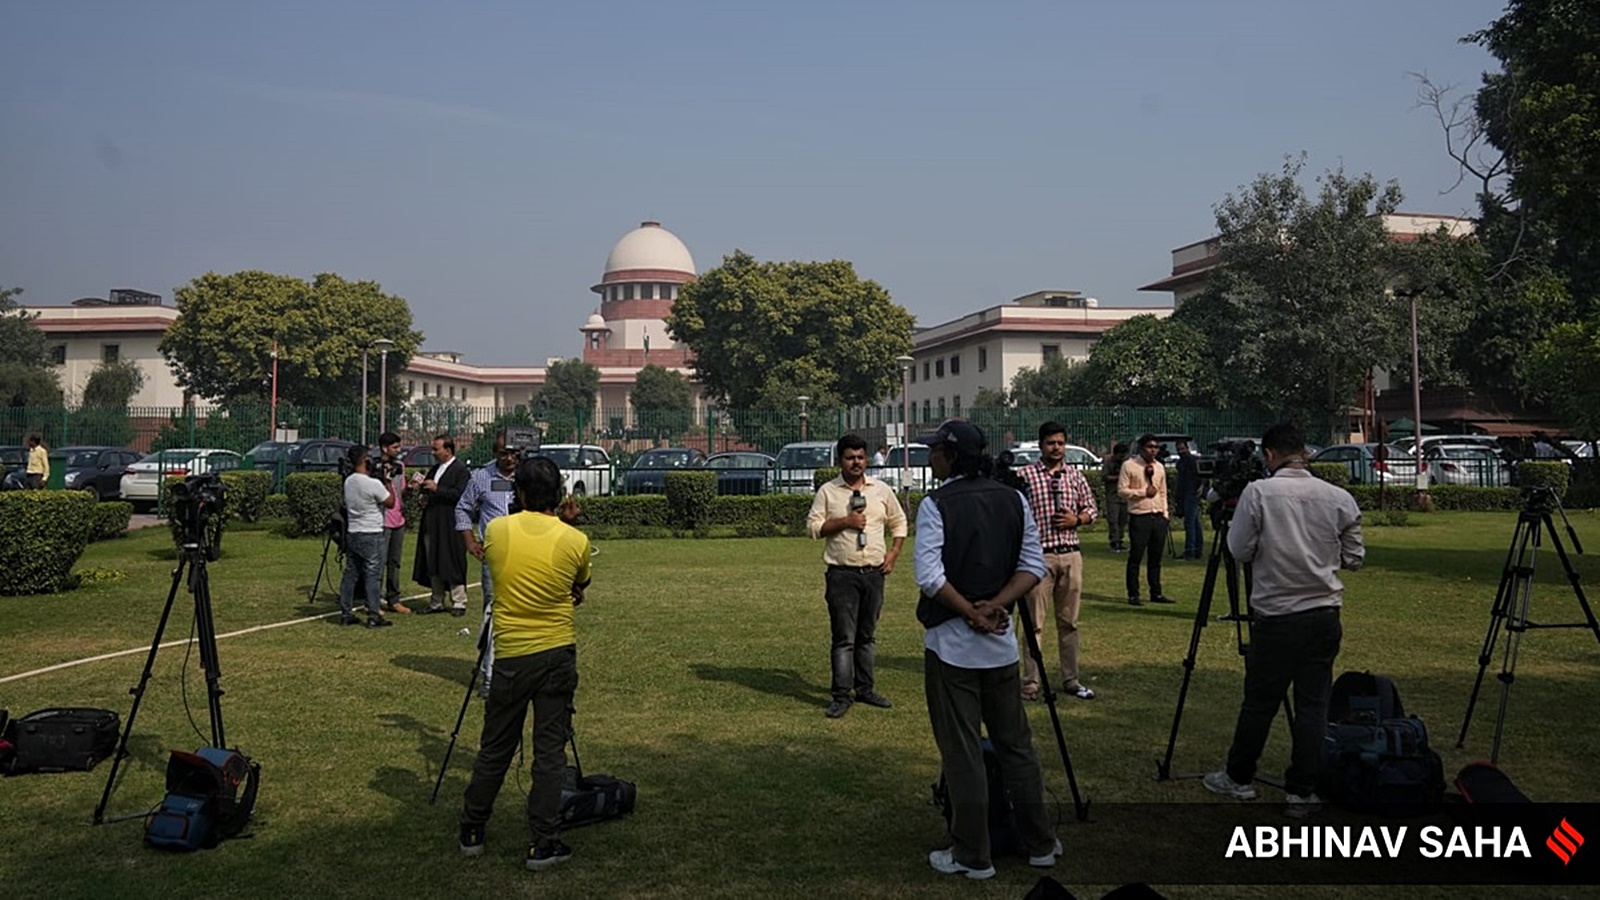 android, day after judge accuses fellow judge, sc stays all proceedings before calcutta hc over matter